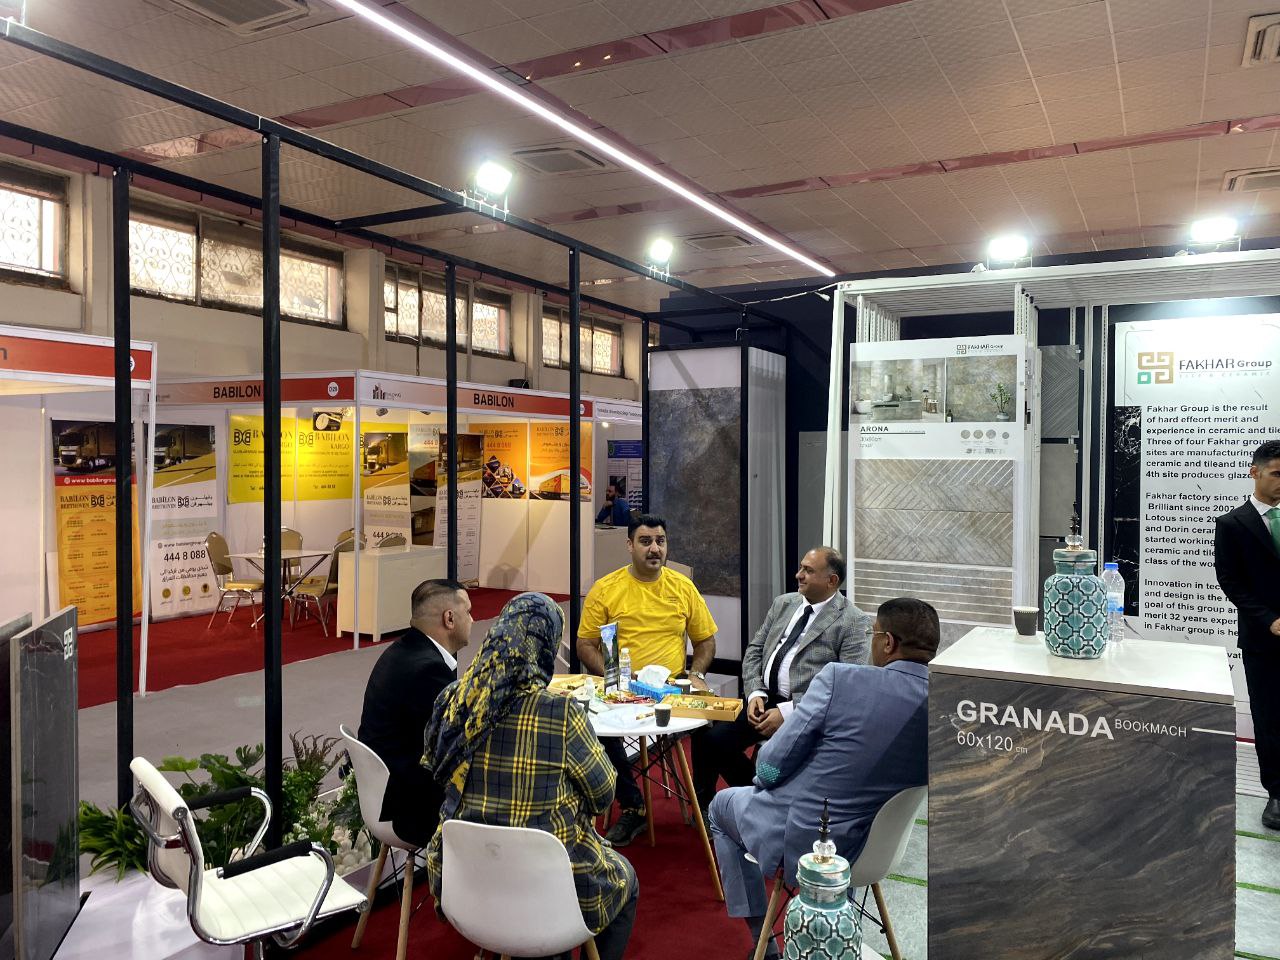 Iraq-Baghdad International Industry and Construction Exhibition, Fakhar Group Tile Production booth